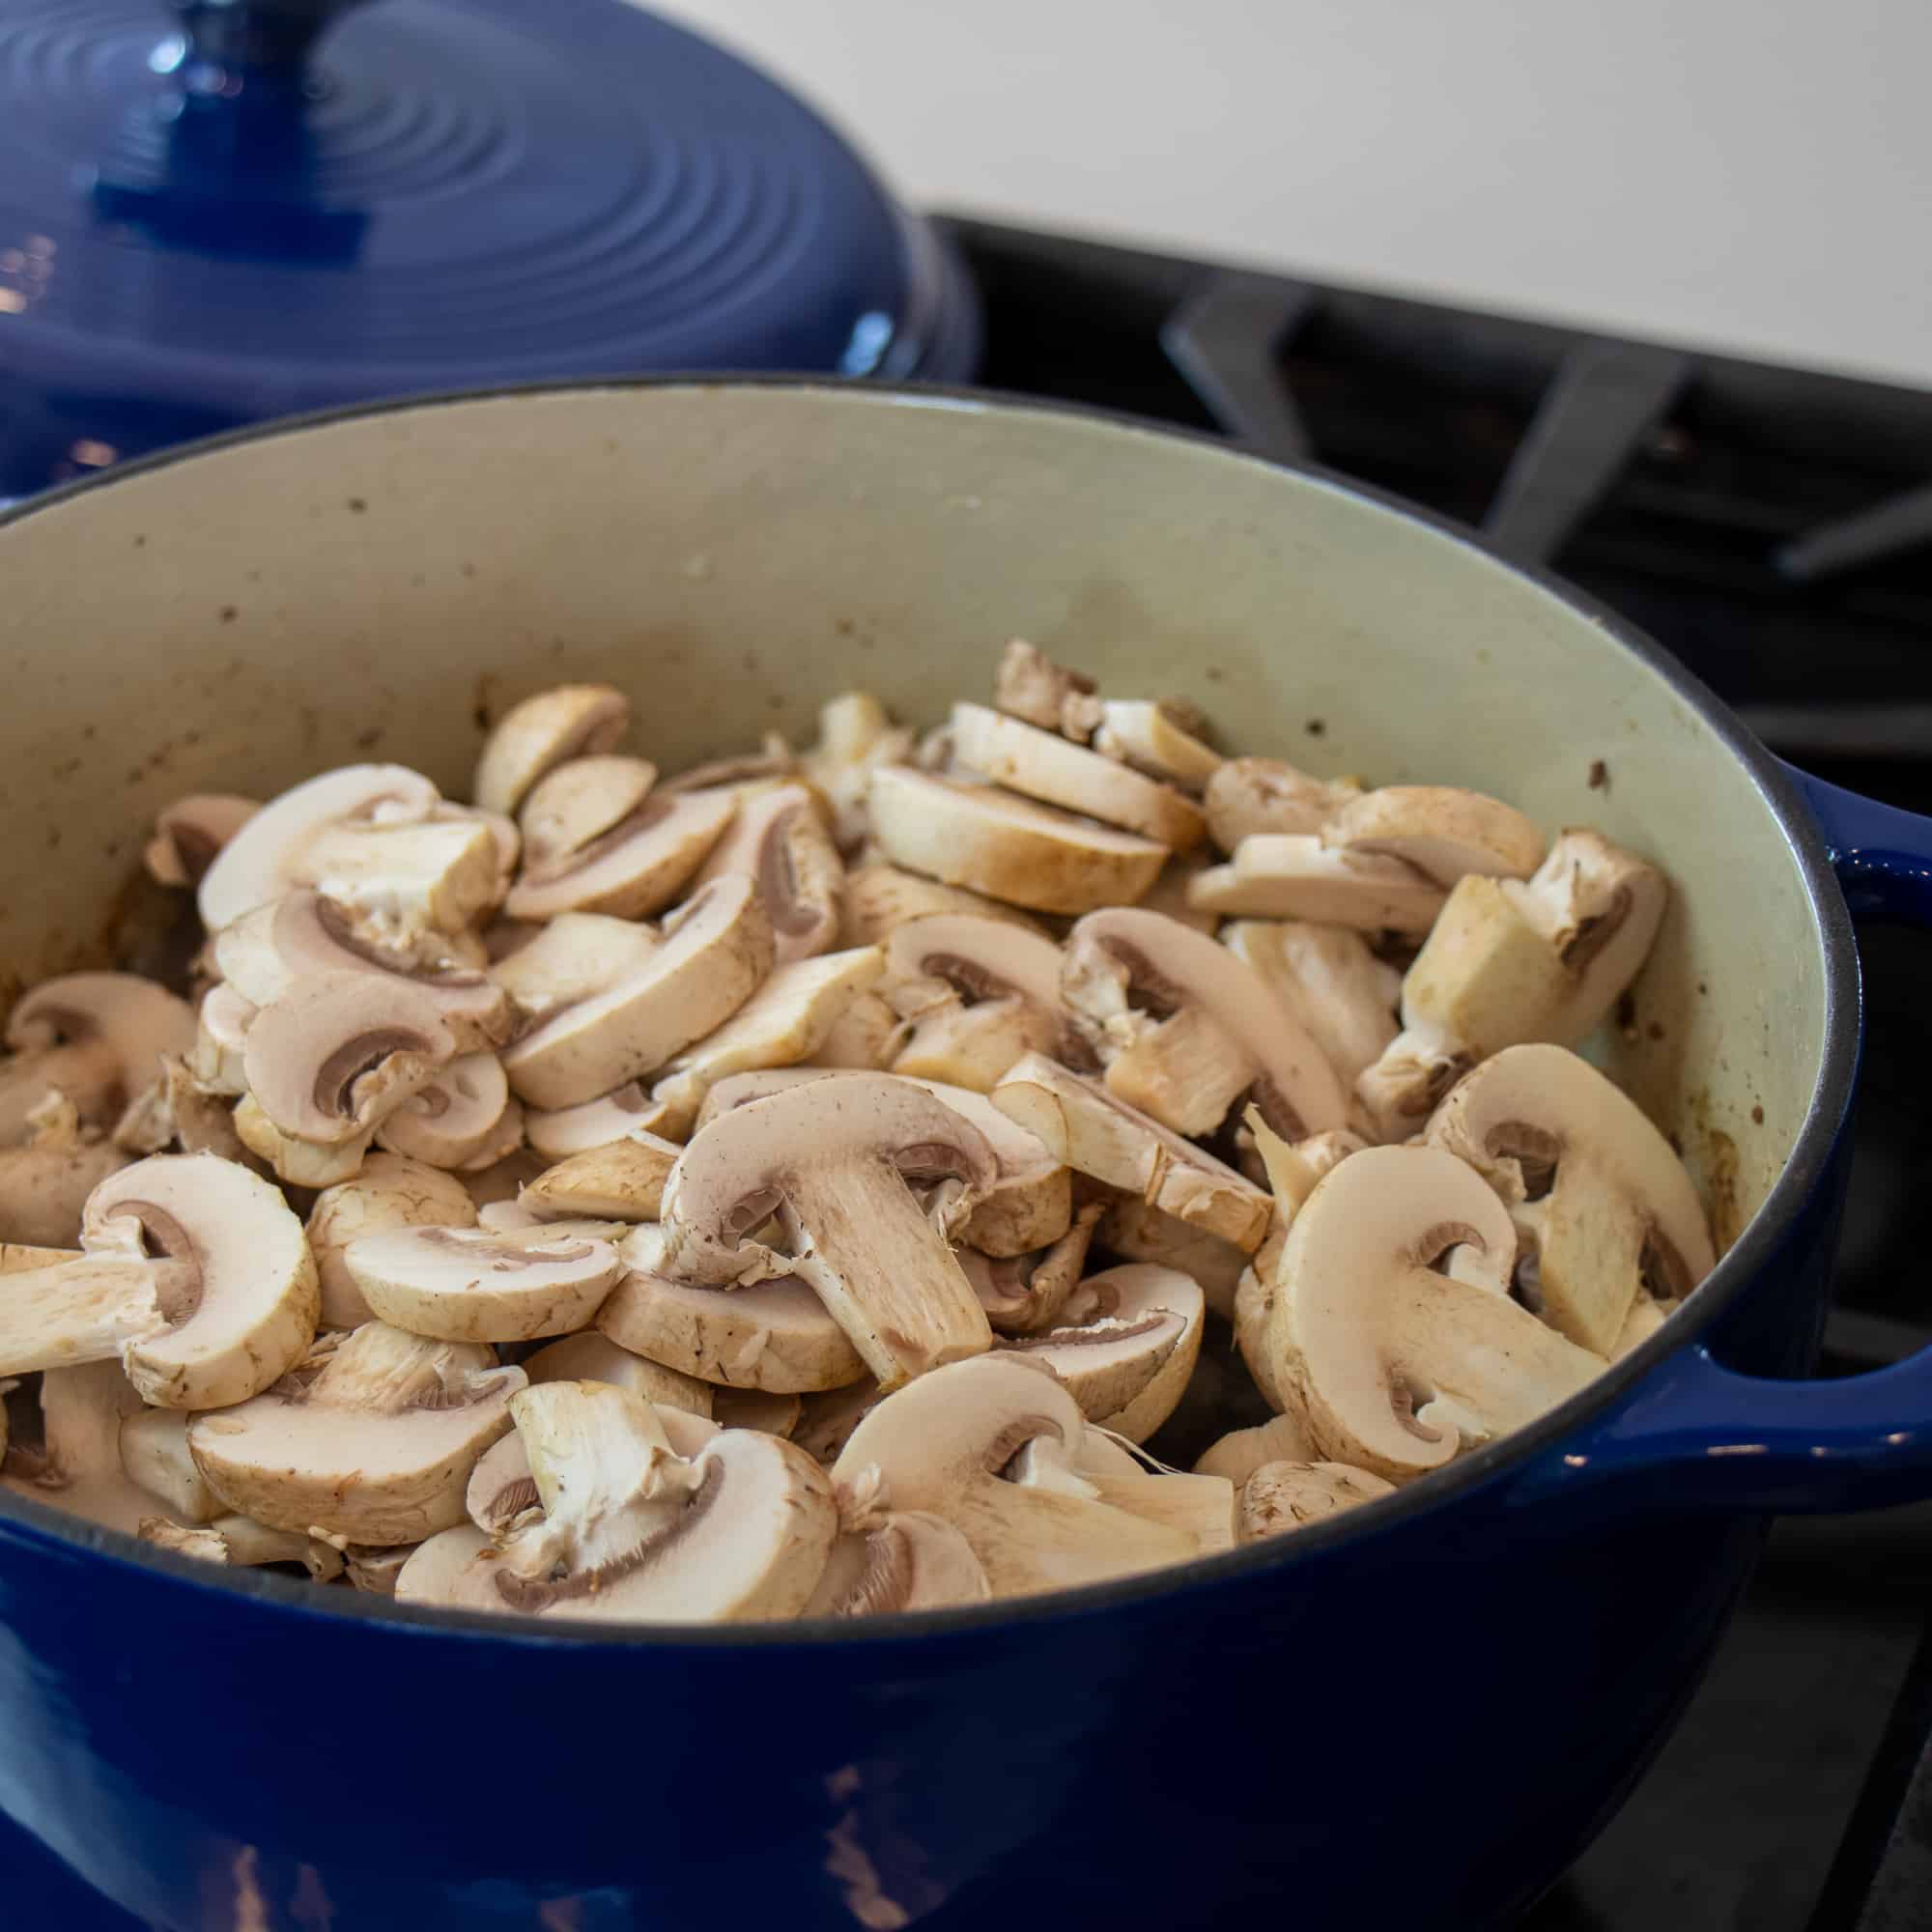 Sliced button mushrooms added to the dutch oven.